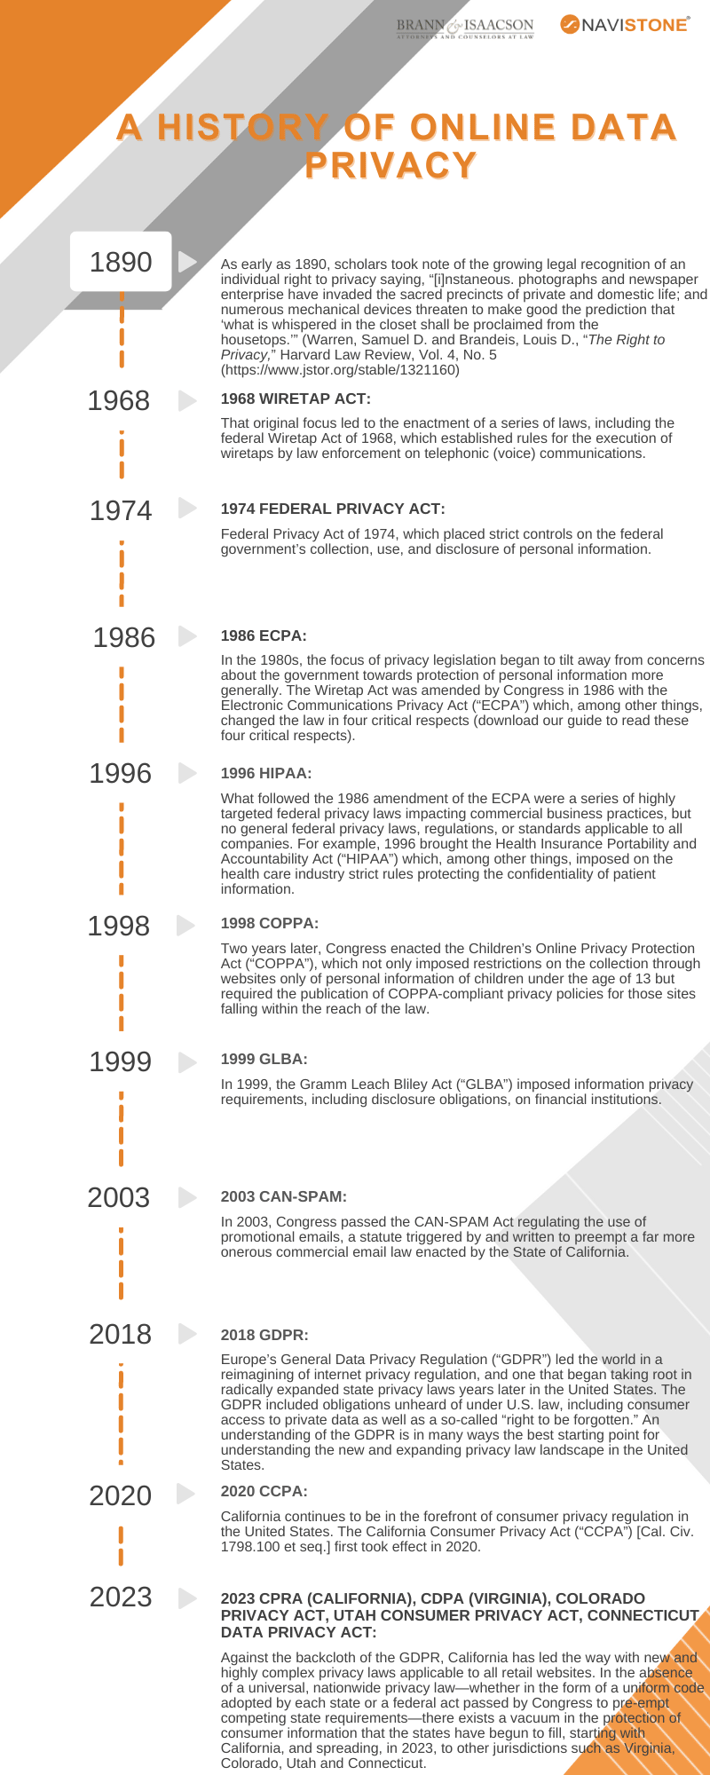 History of Online Privacy (2)